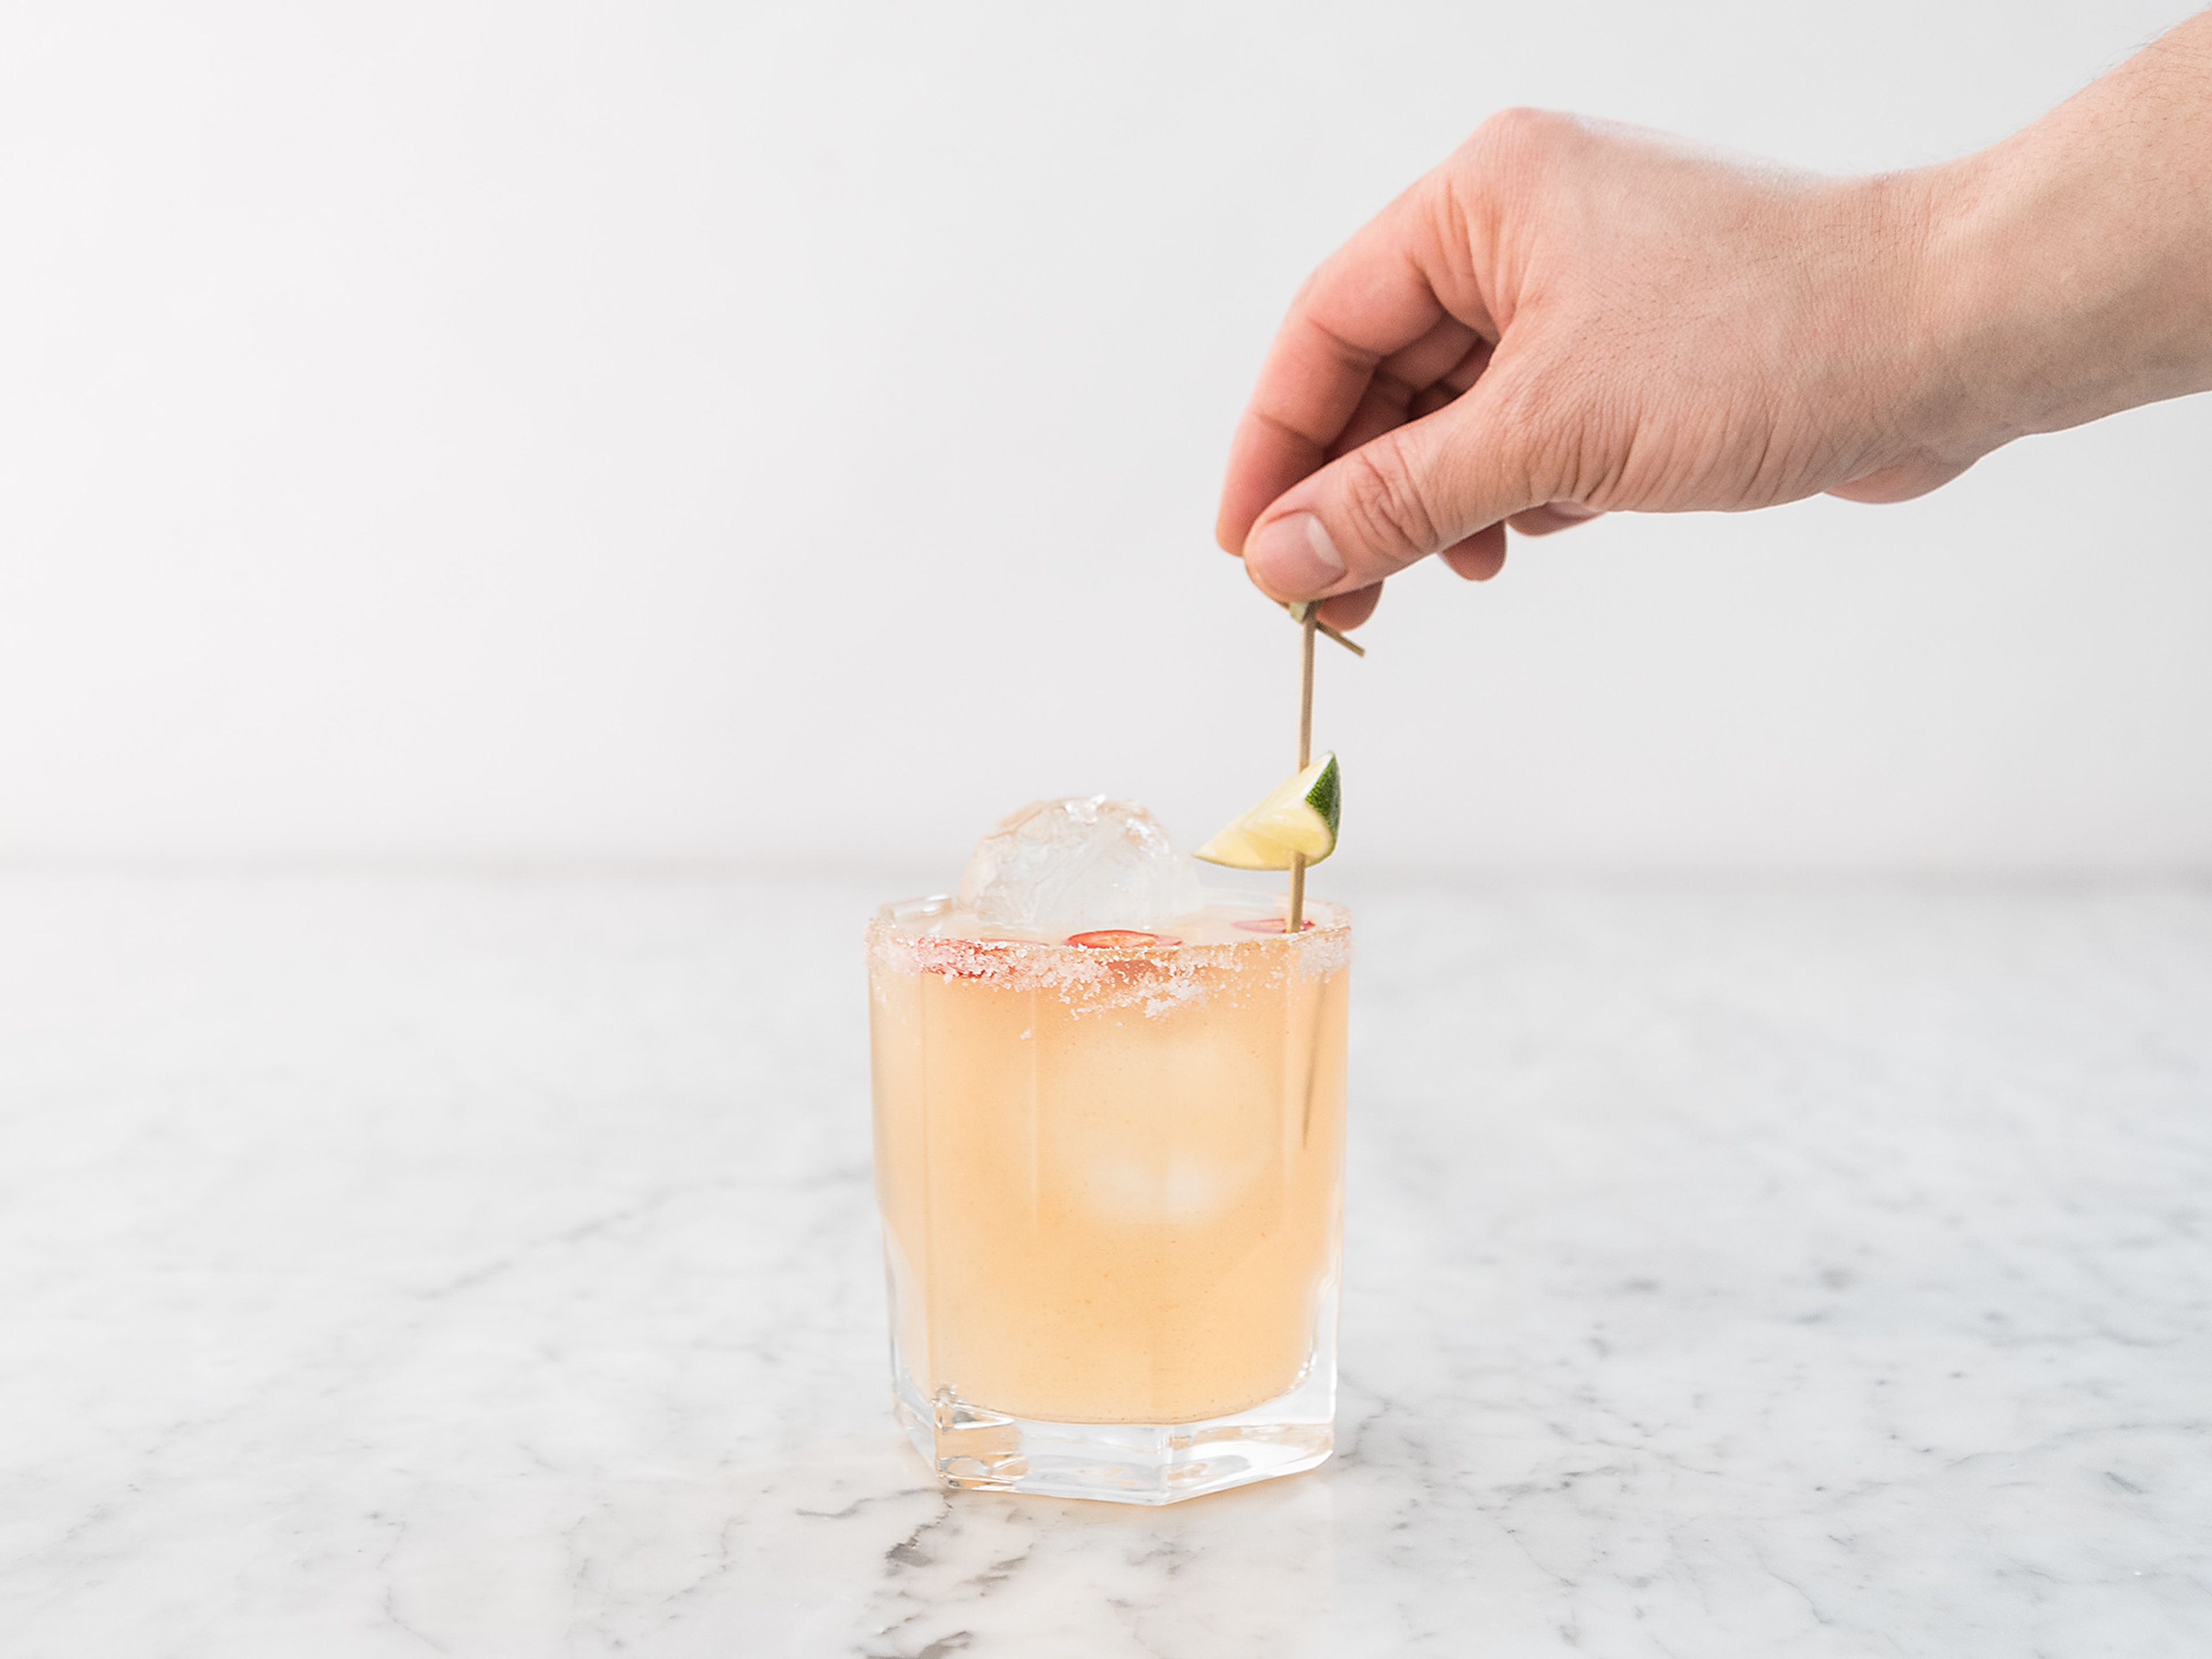 Strain into an ice filled, salt rimmed cocktail glass. Garnish with chili rings and a lime wedge. Enjoy!